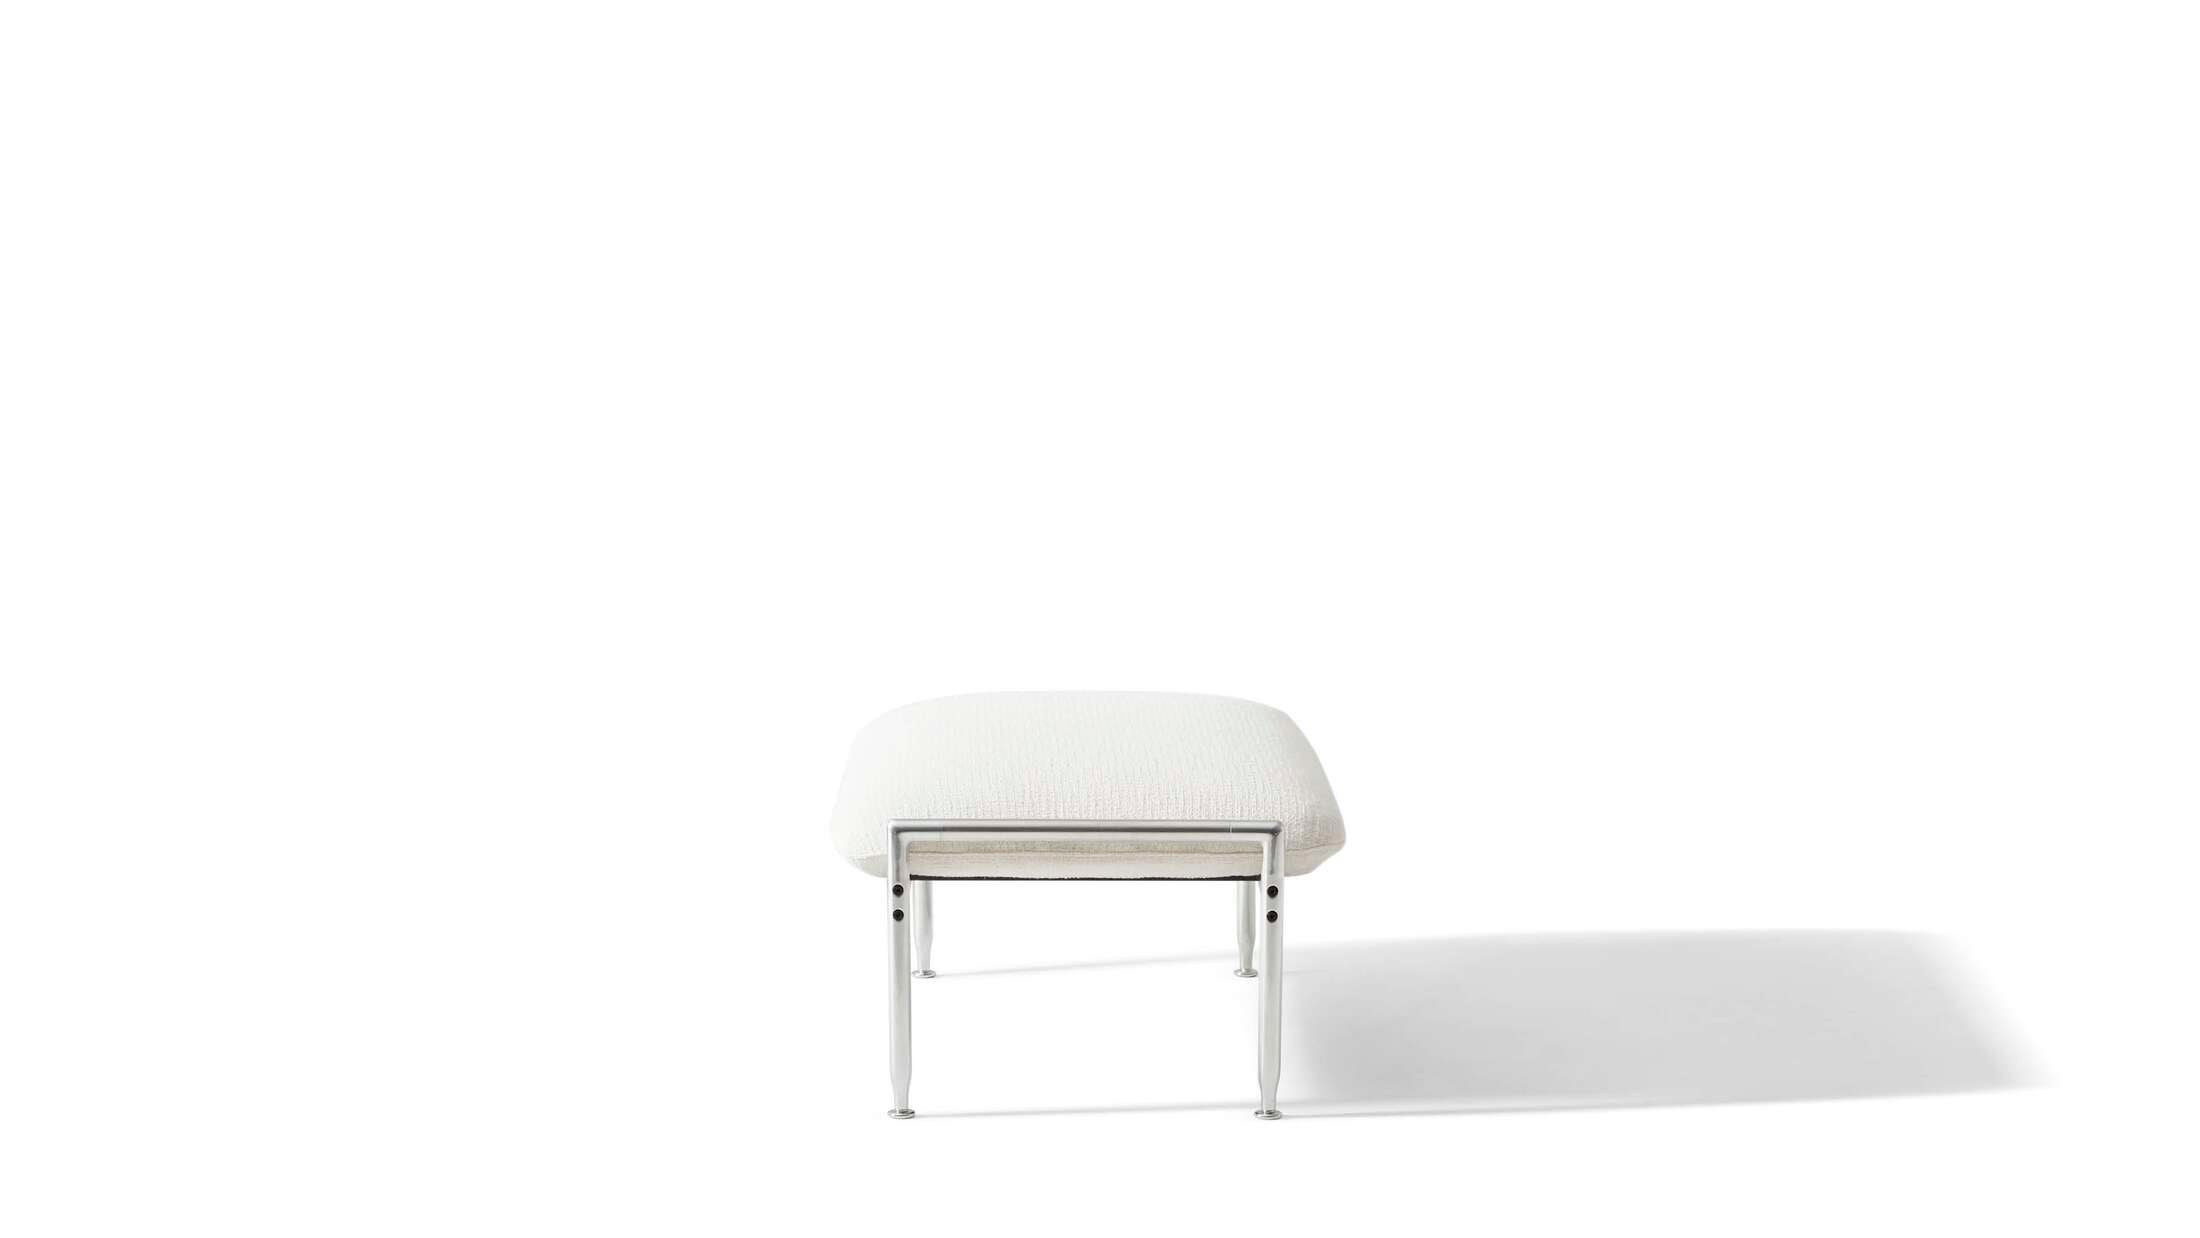 Antonio Citterio Esosoft bench or stool by Cassina, Italy - 2022. Prices vary dependent on material and color.